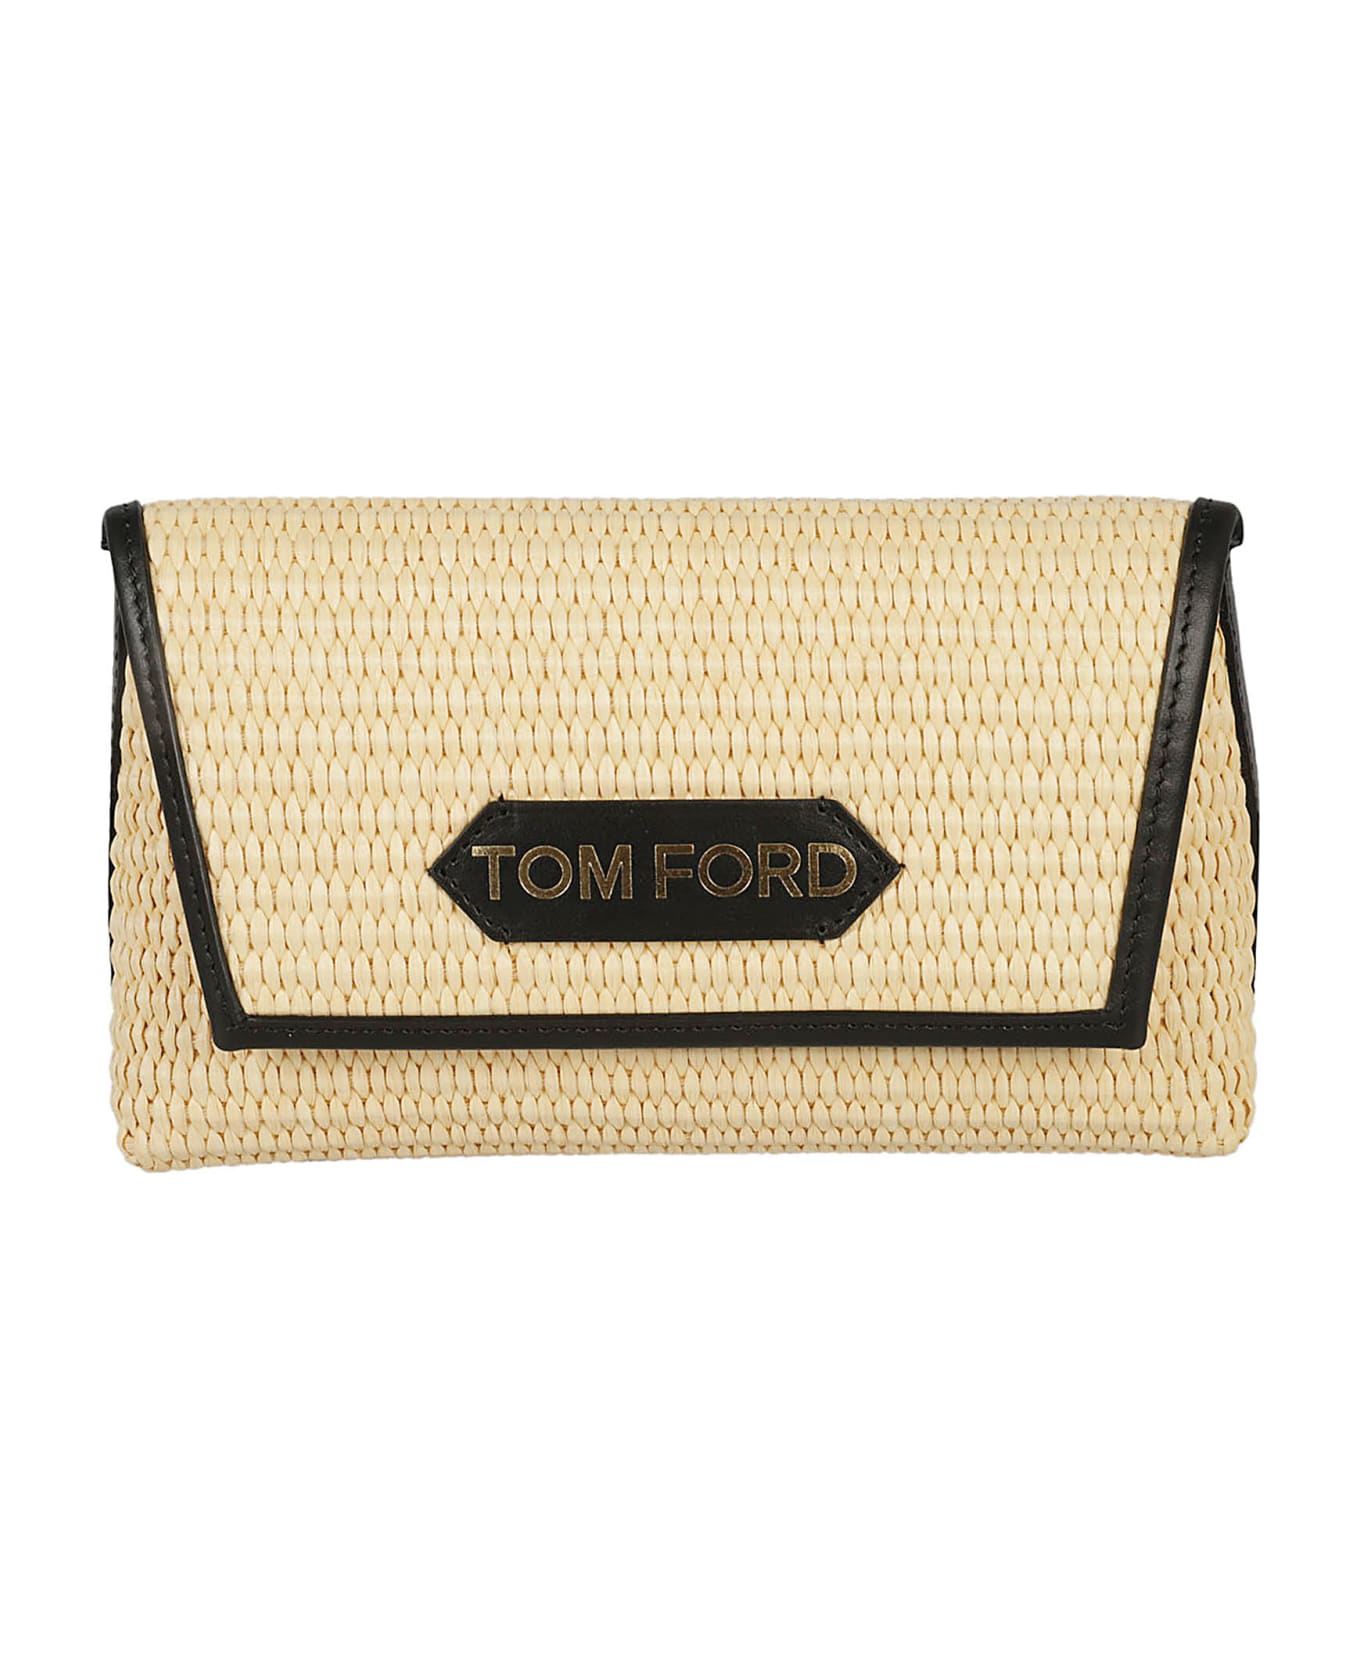 Tom Ford Weave Logo Patch Tote - Natural/Black クラッチバッグ